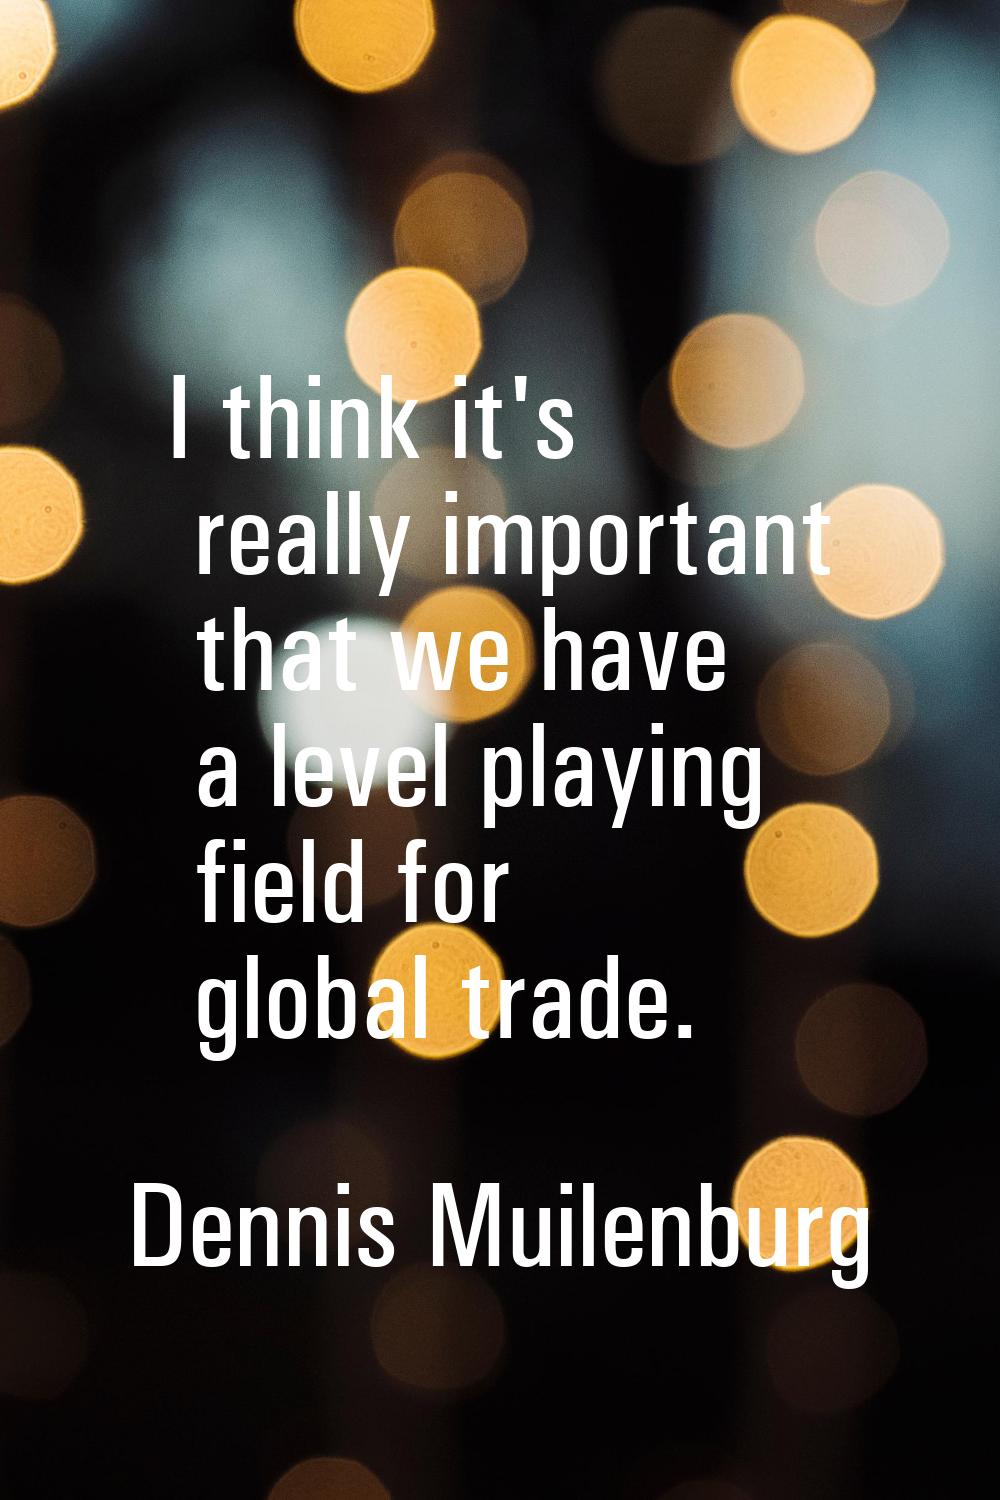 I think it's really important that we have a level playing field for global trade.